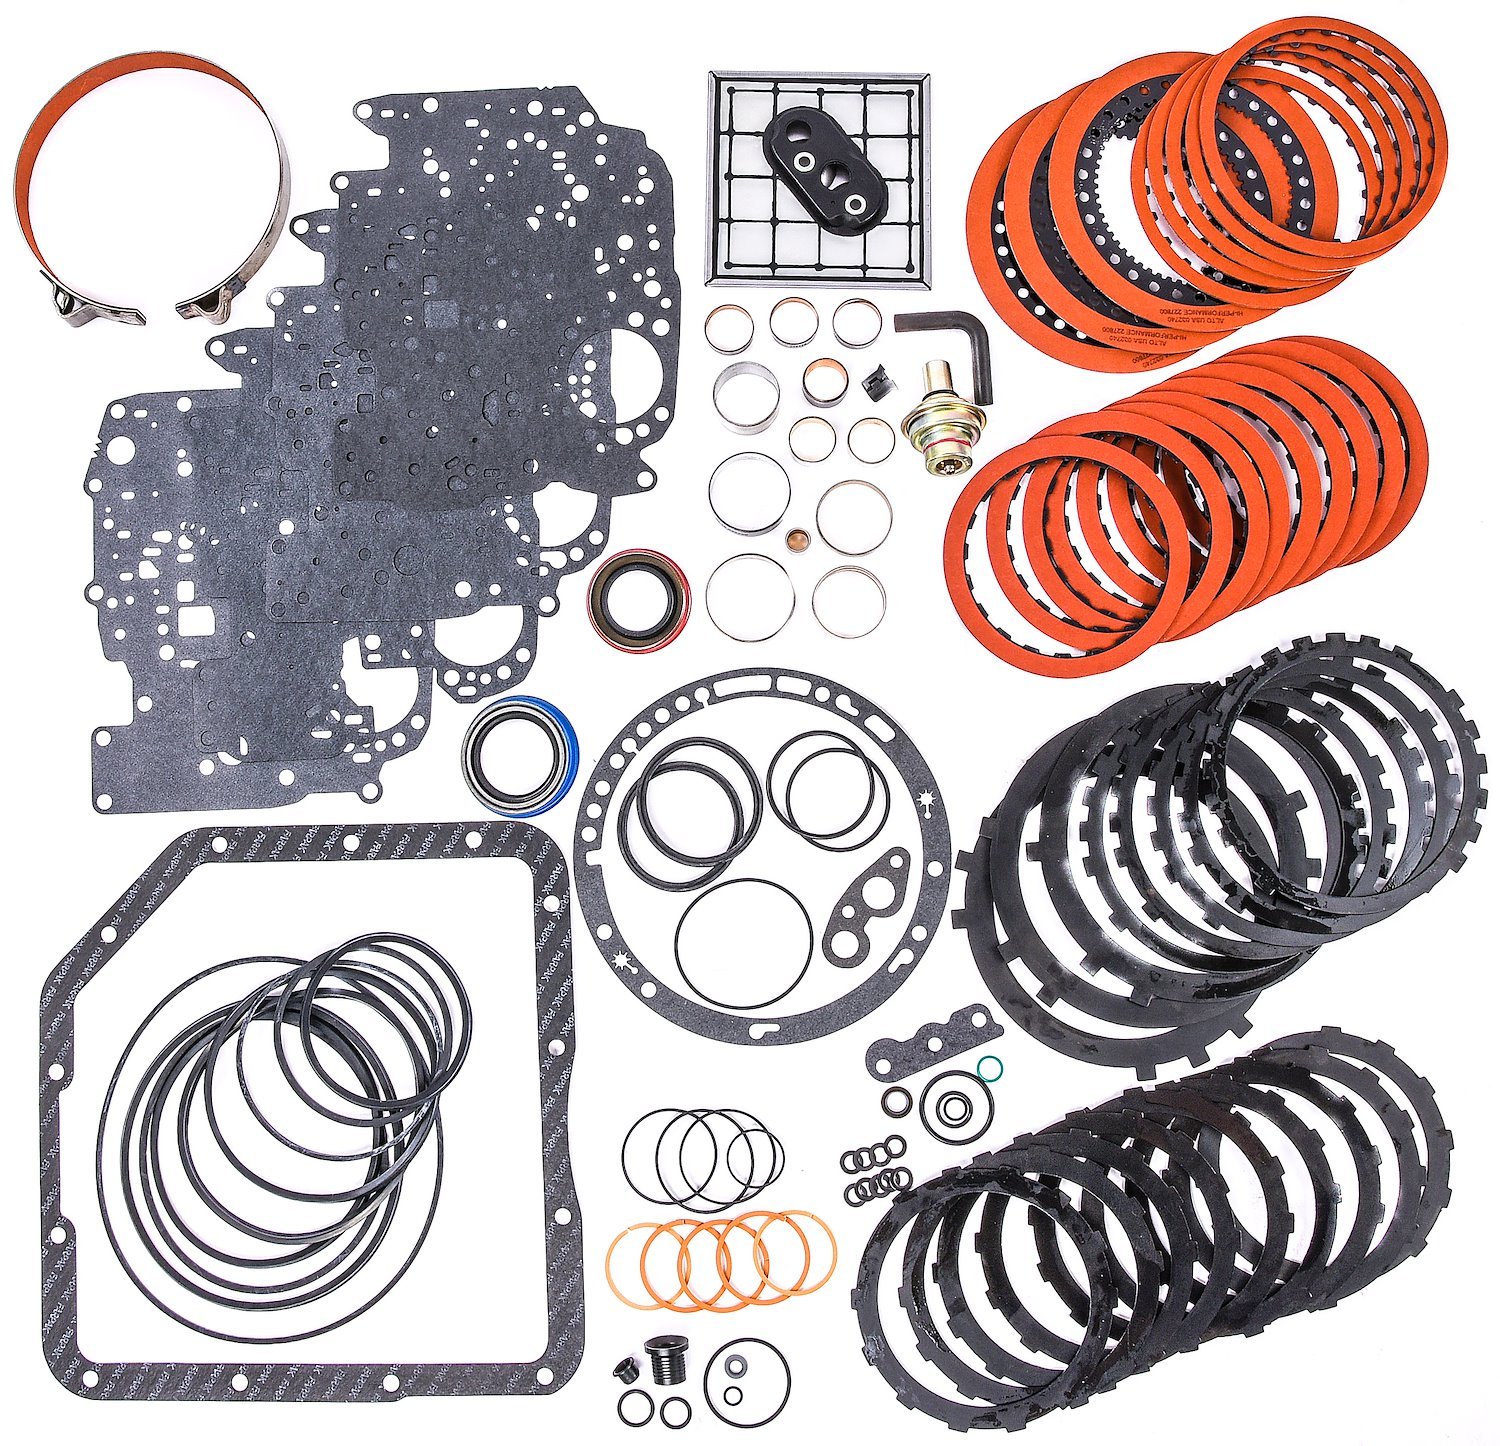 Automatic Transmission High-Performance Rebuild Kit for 1969-1981